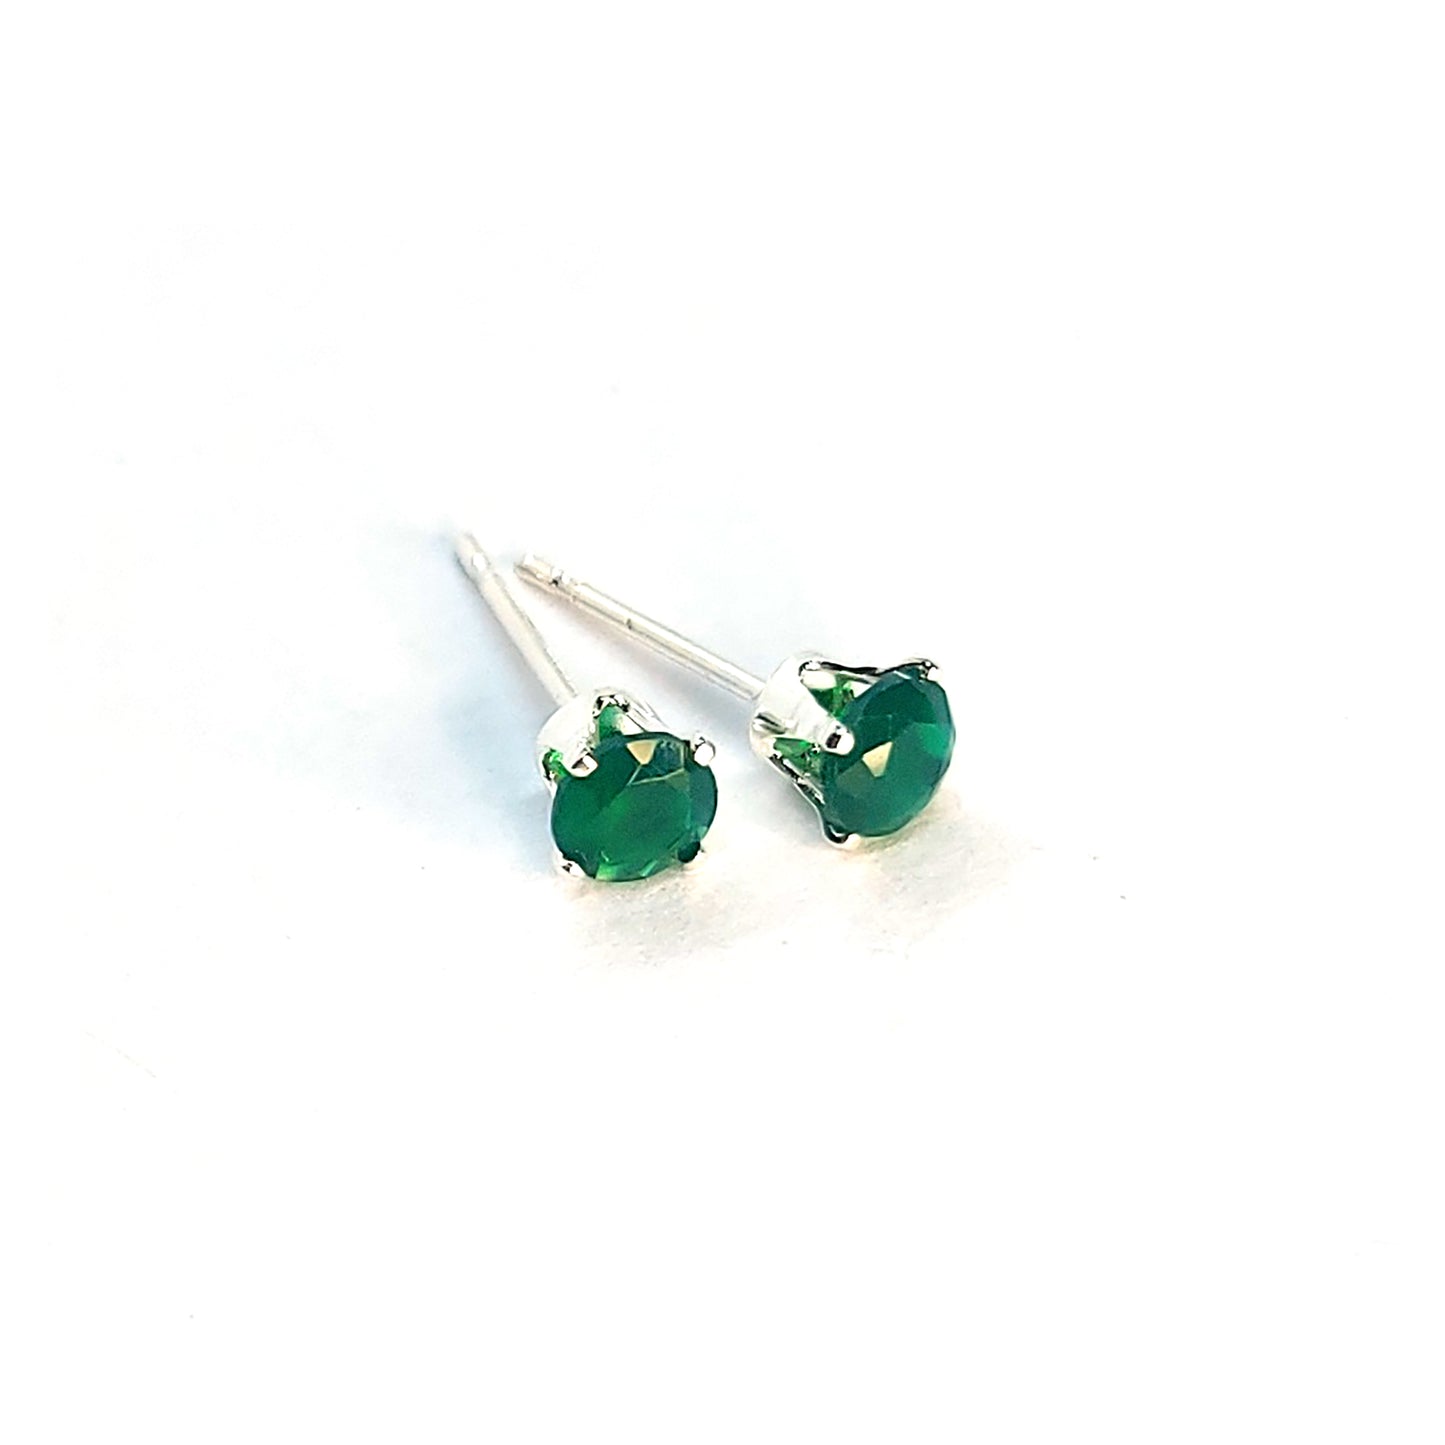 Silver 4 claw stud earrings with faceted green agate gemstones.